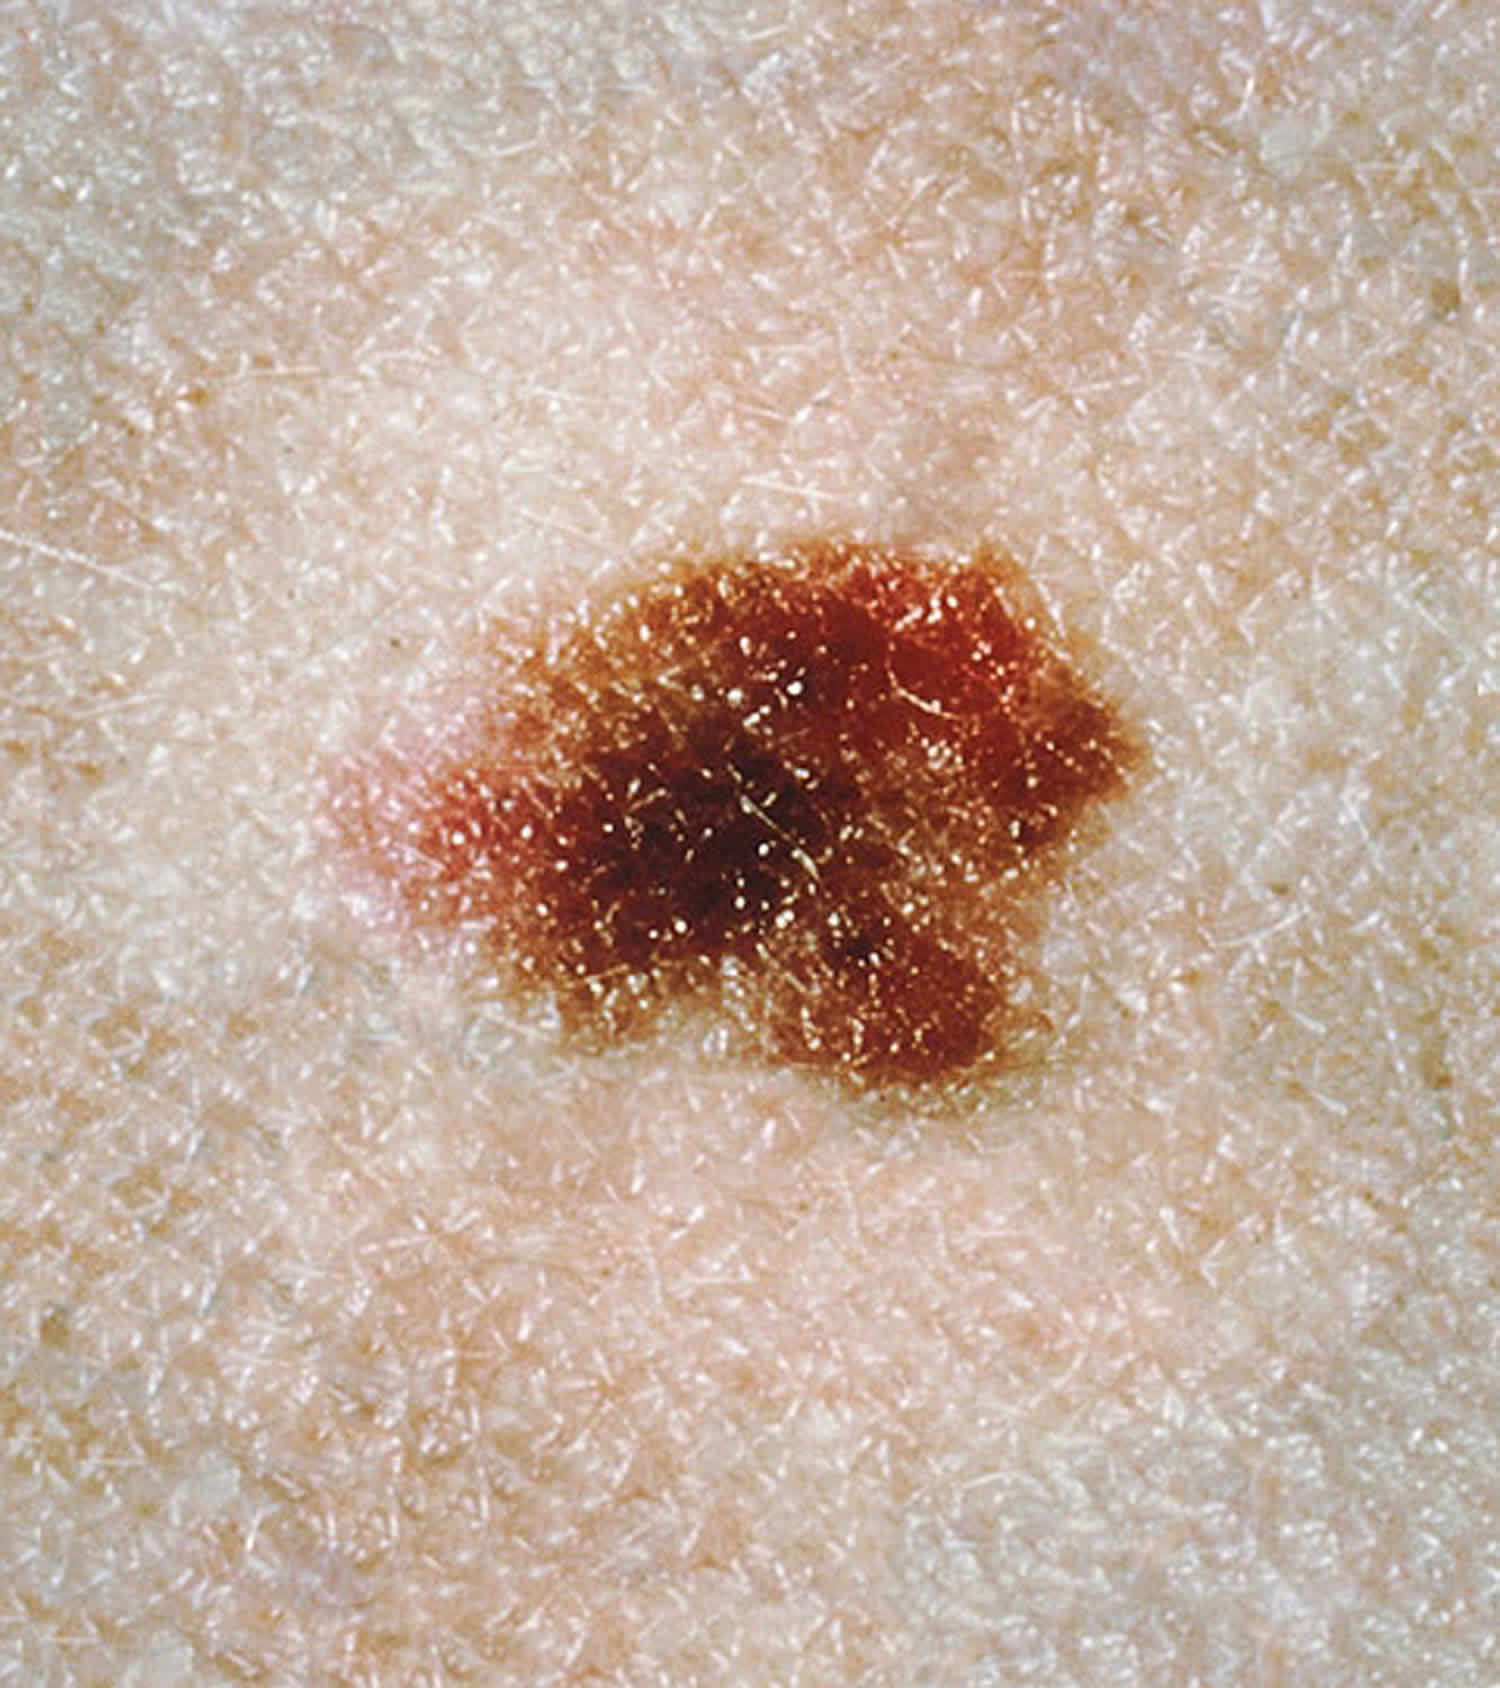 atypical nevus